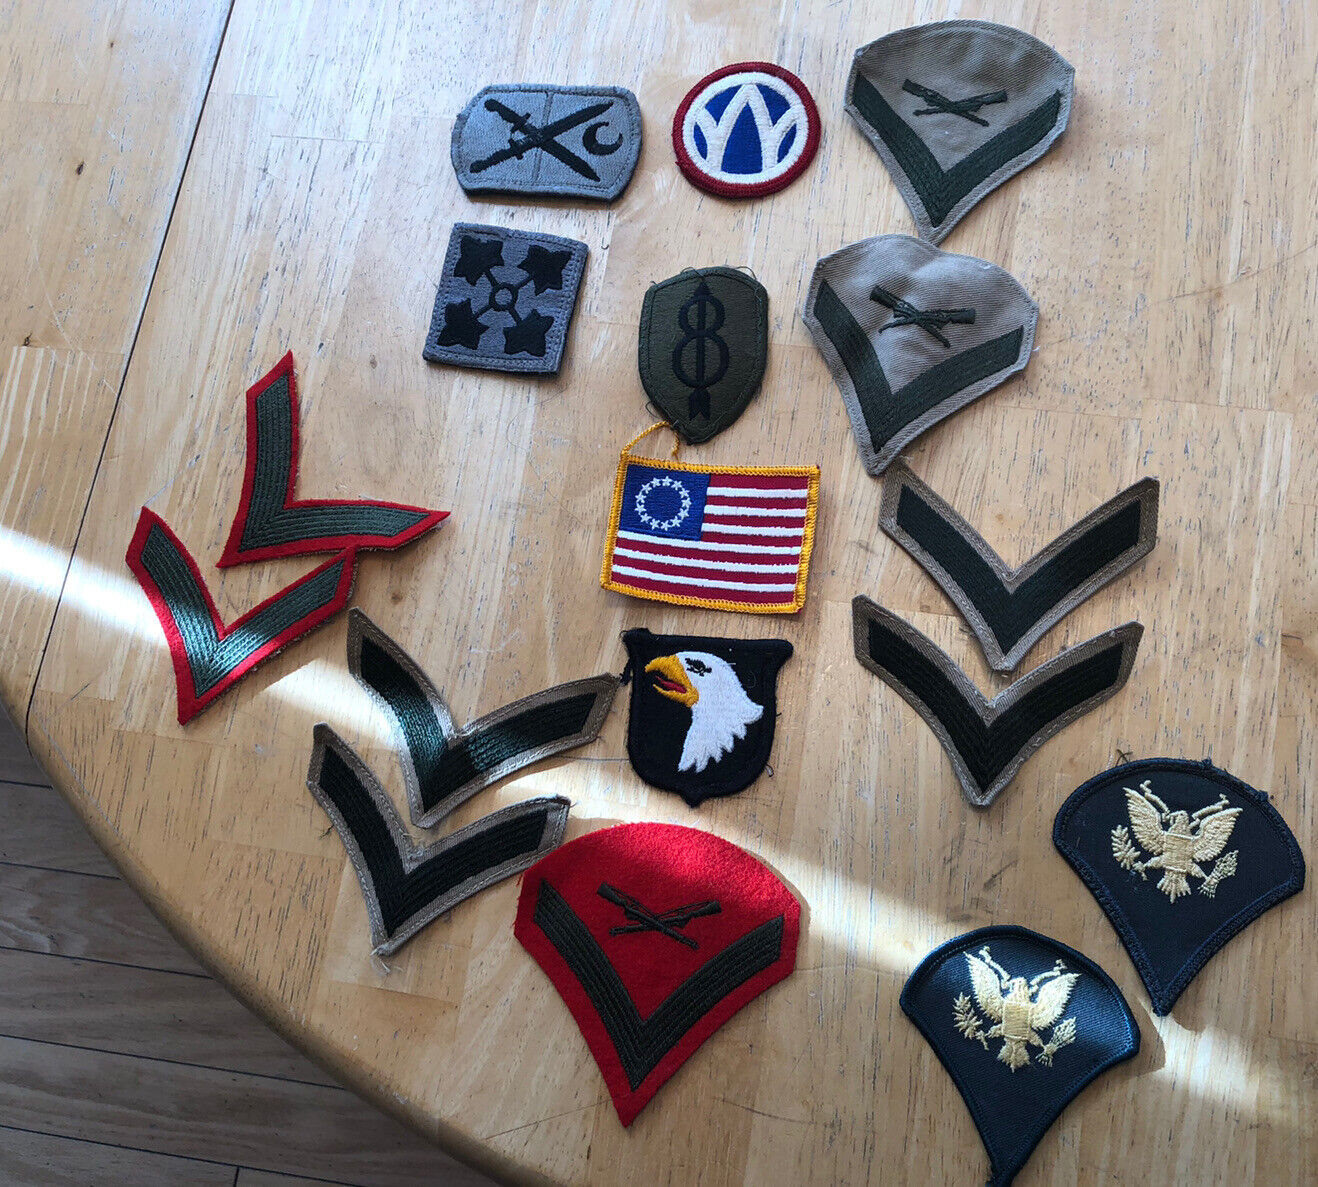 Vintage War US Army Military Insignia Shoulder Patches Lot Of 17